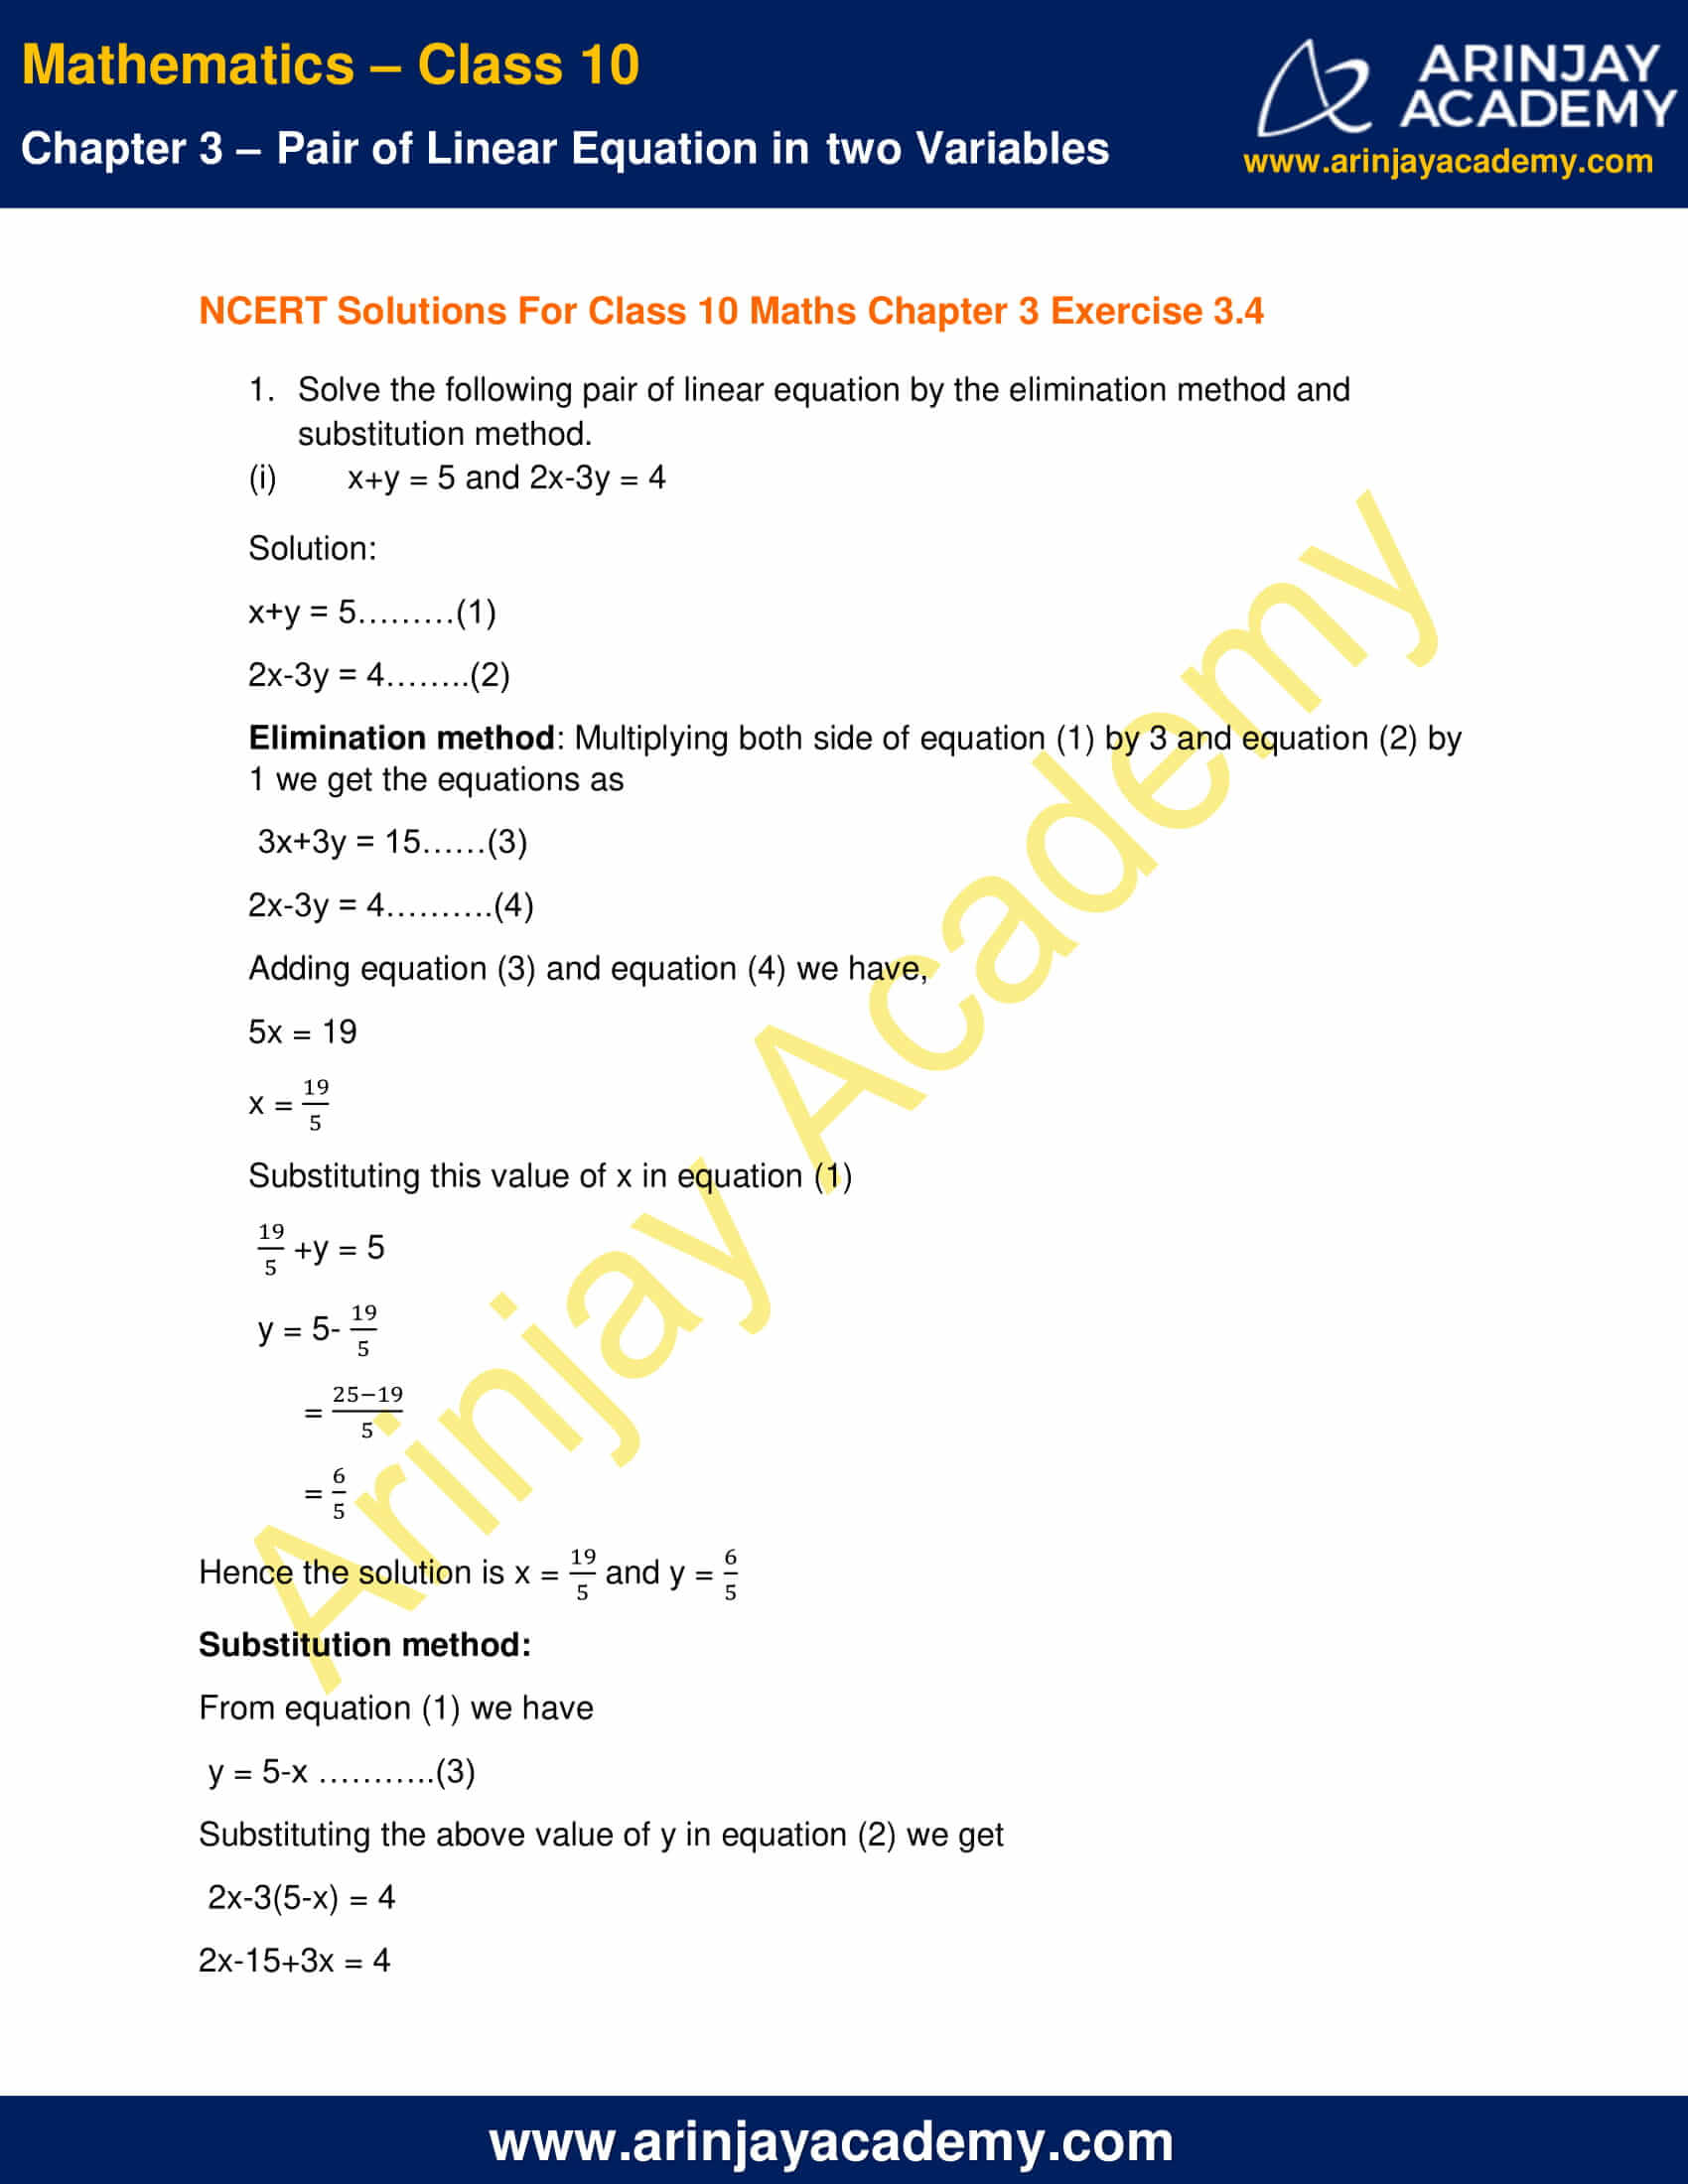 NCERT Solutions For Class 10 Maths Chapter 3 Exercise 3.4 image 1